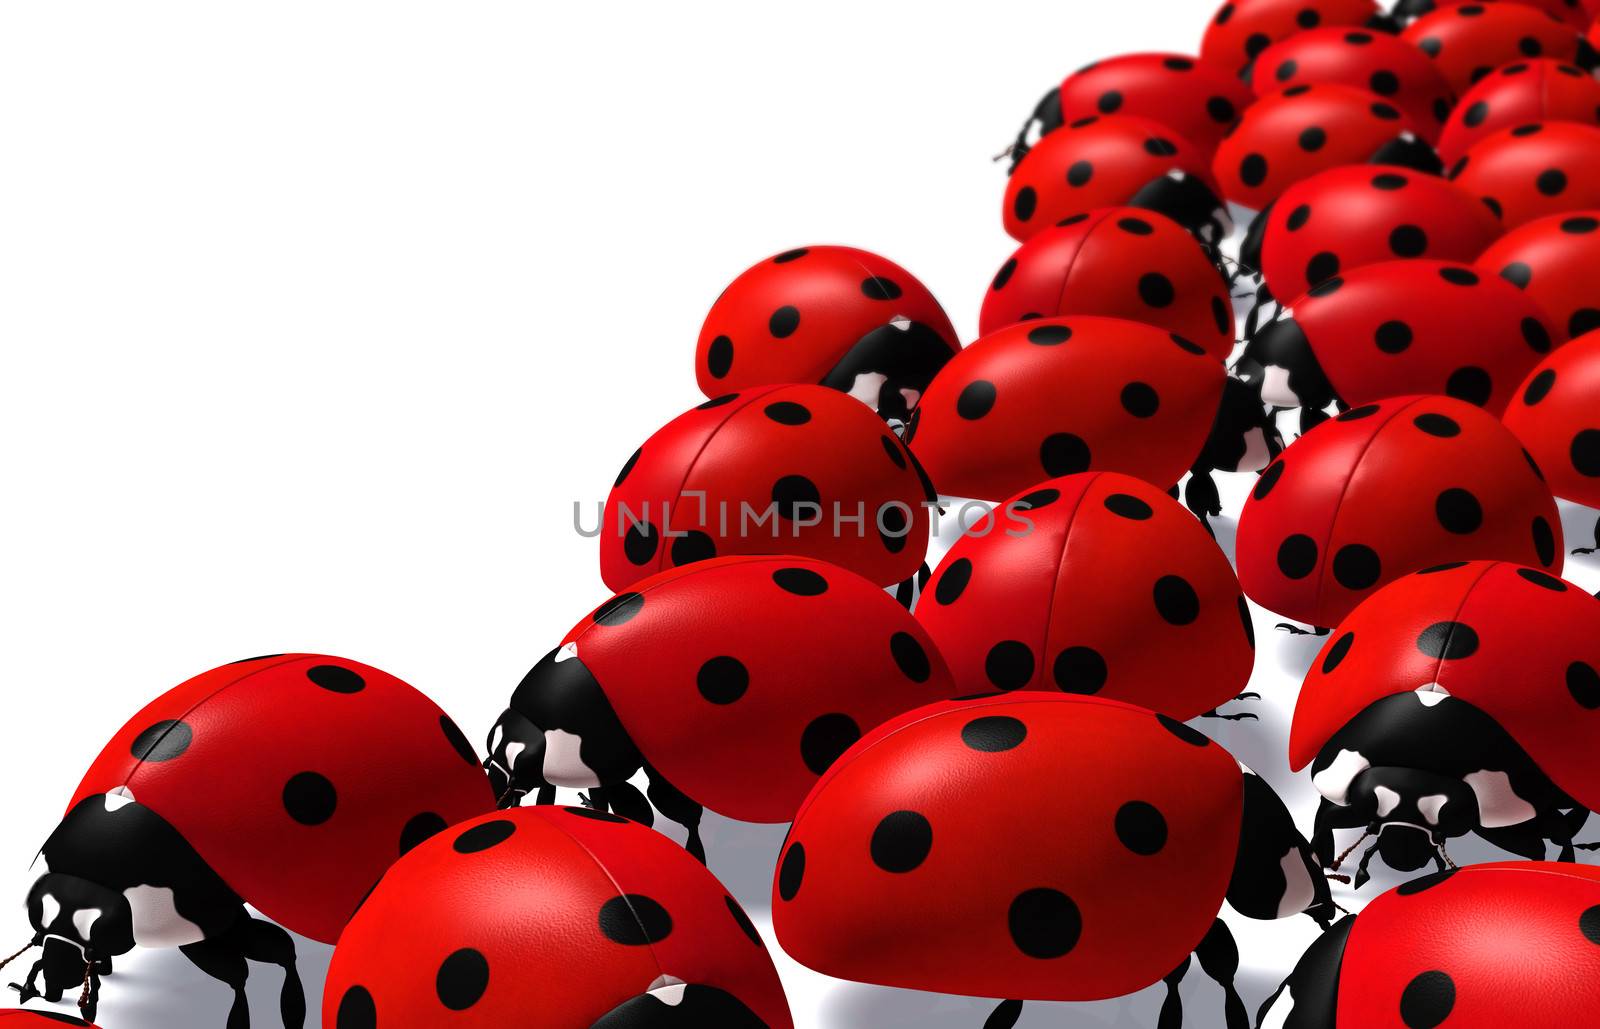 closeup of a portion of a group of red ladybugs on a white background